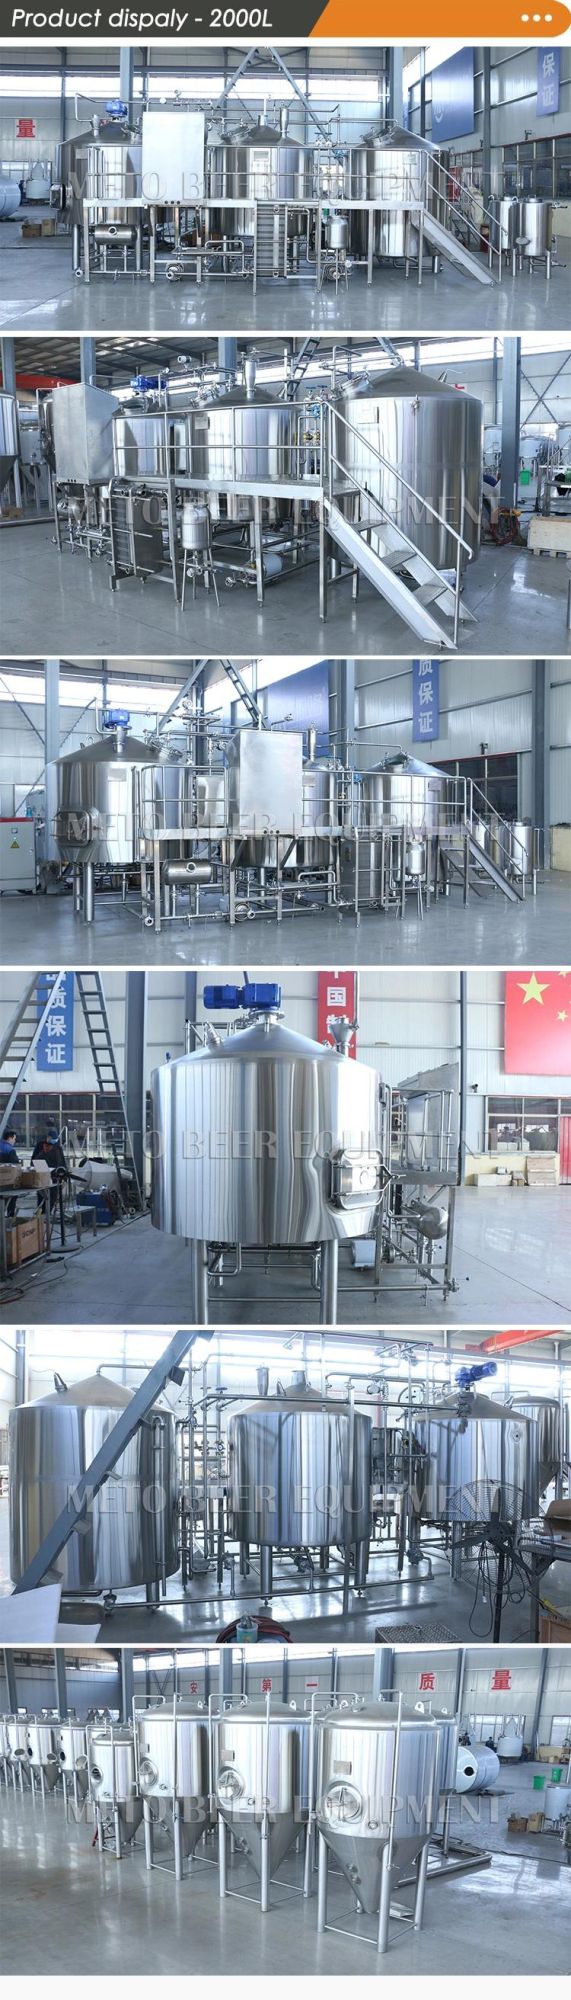 2000L 20bbl Industrial Large Brewing Equipment for Beer Brewery Plant